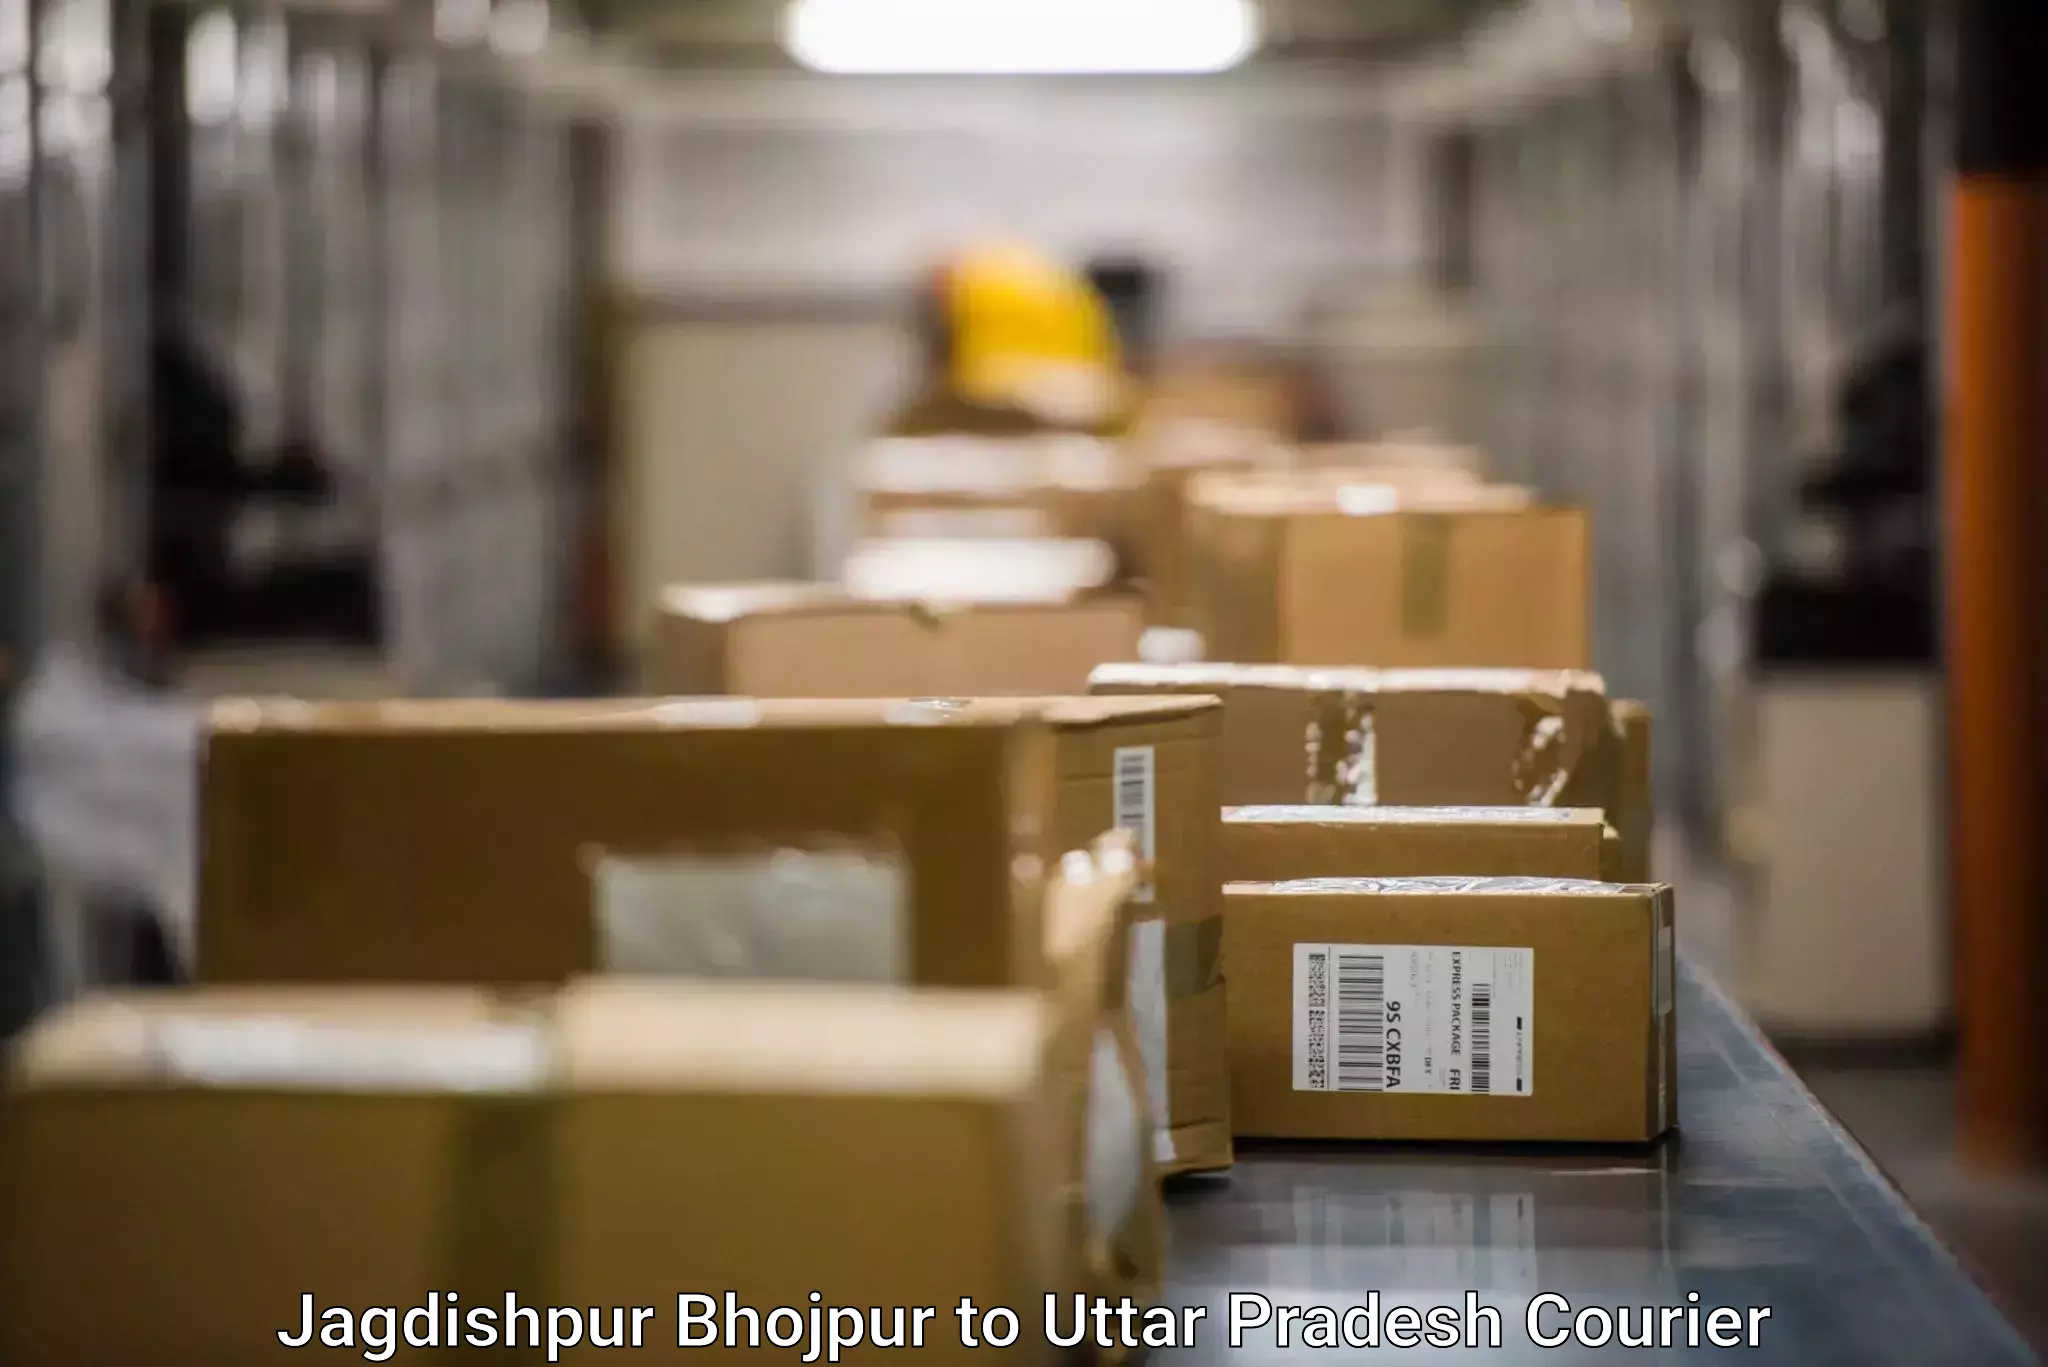 Expedited parcel delivery Jagdishpur Bhojpur to Allahabad